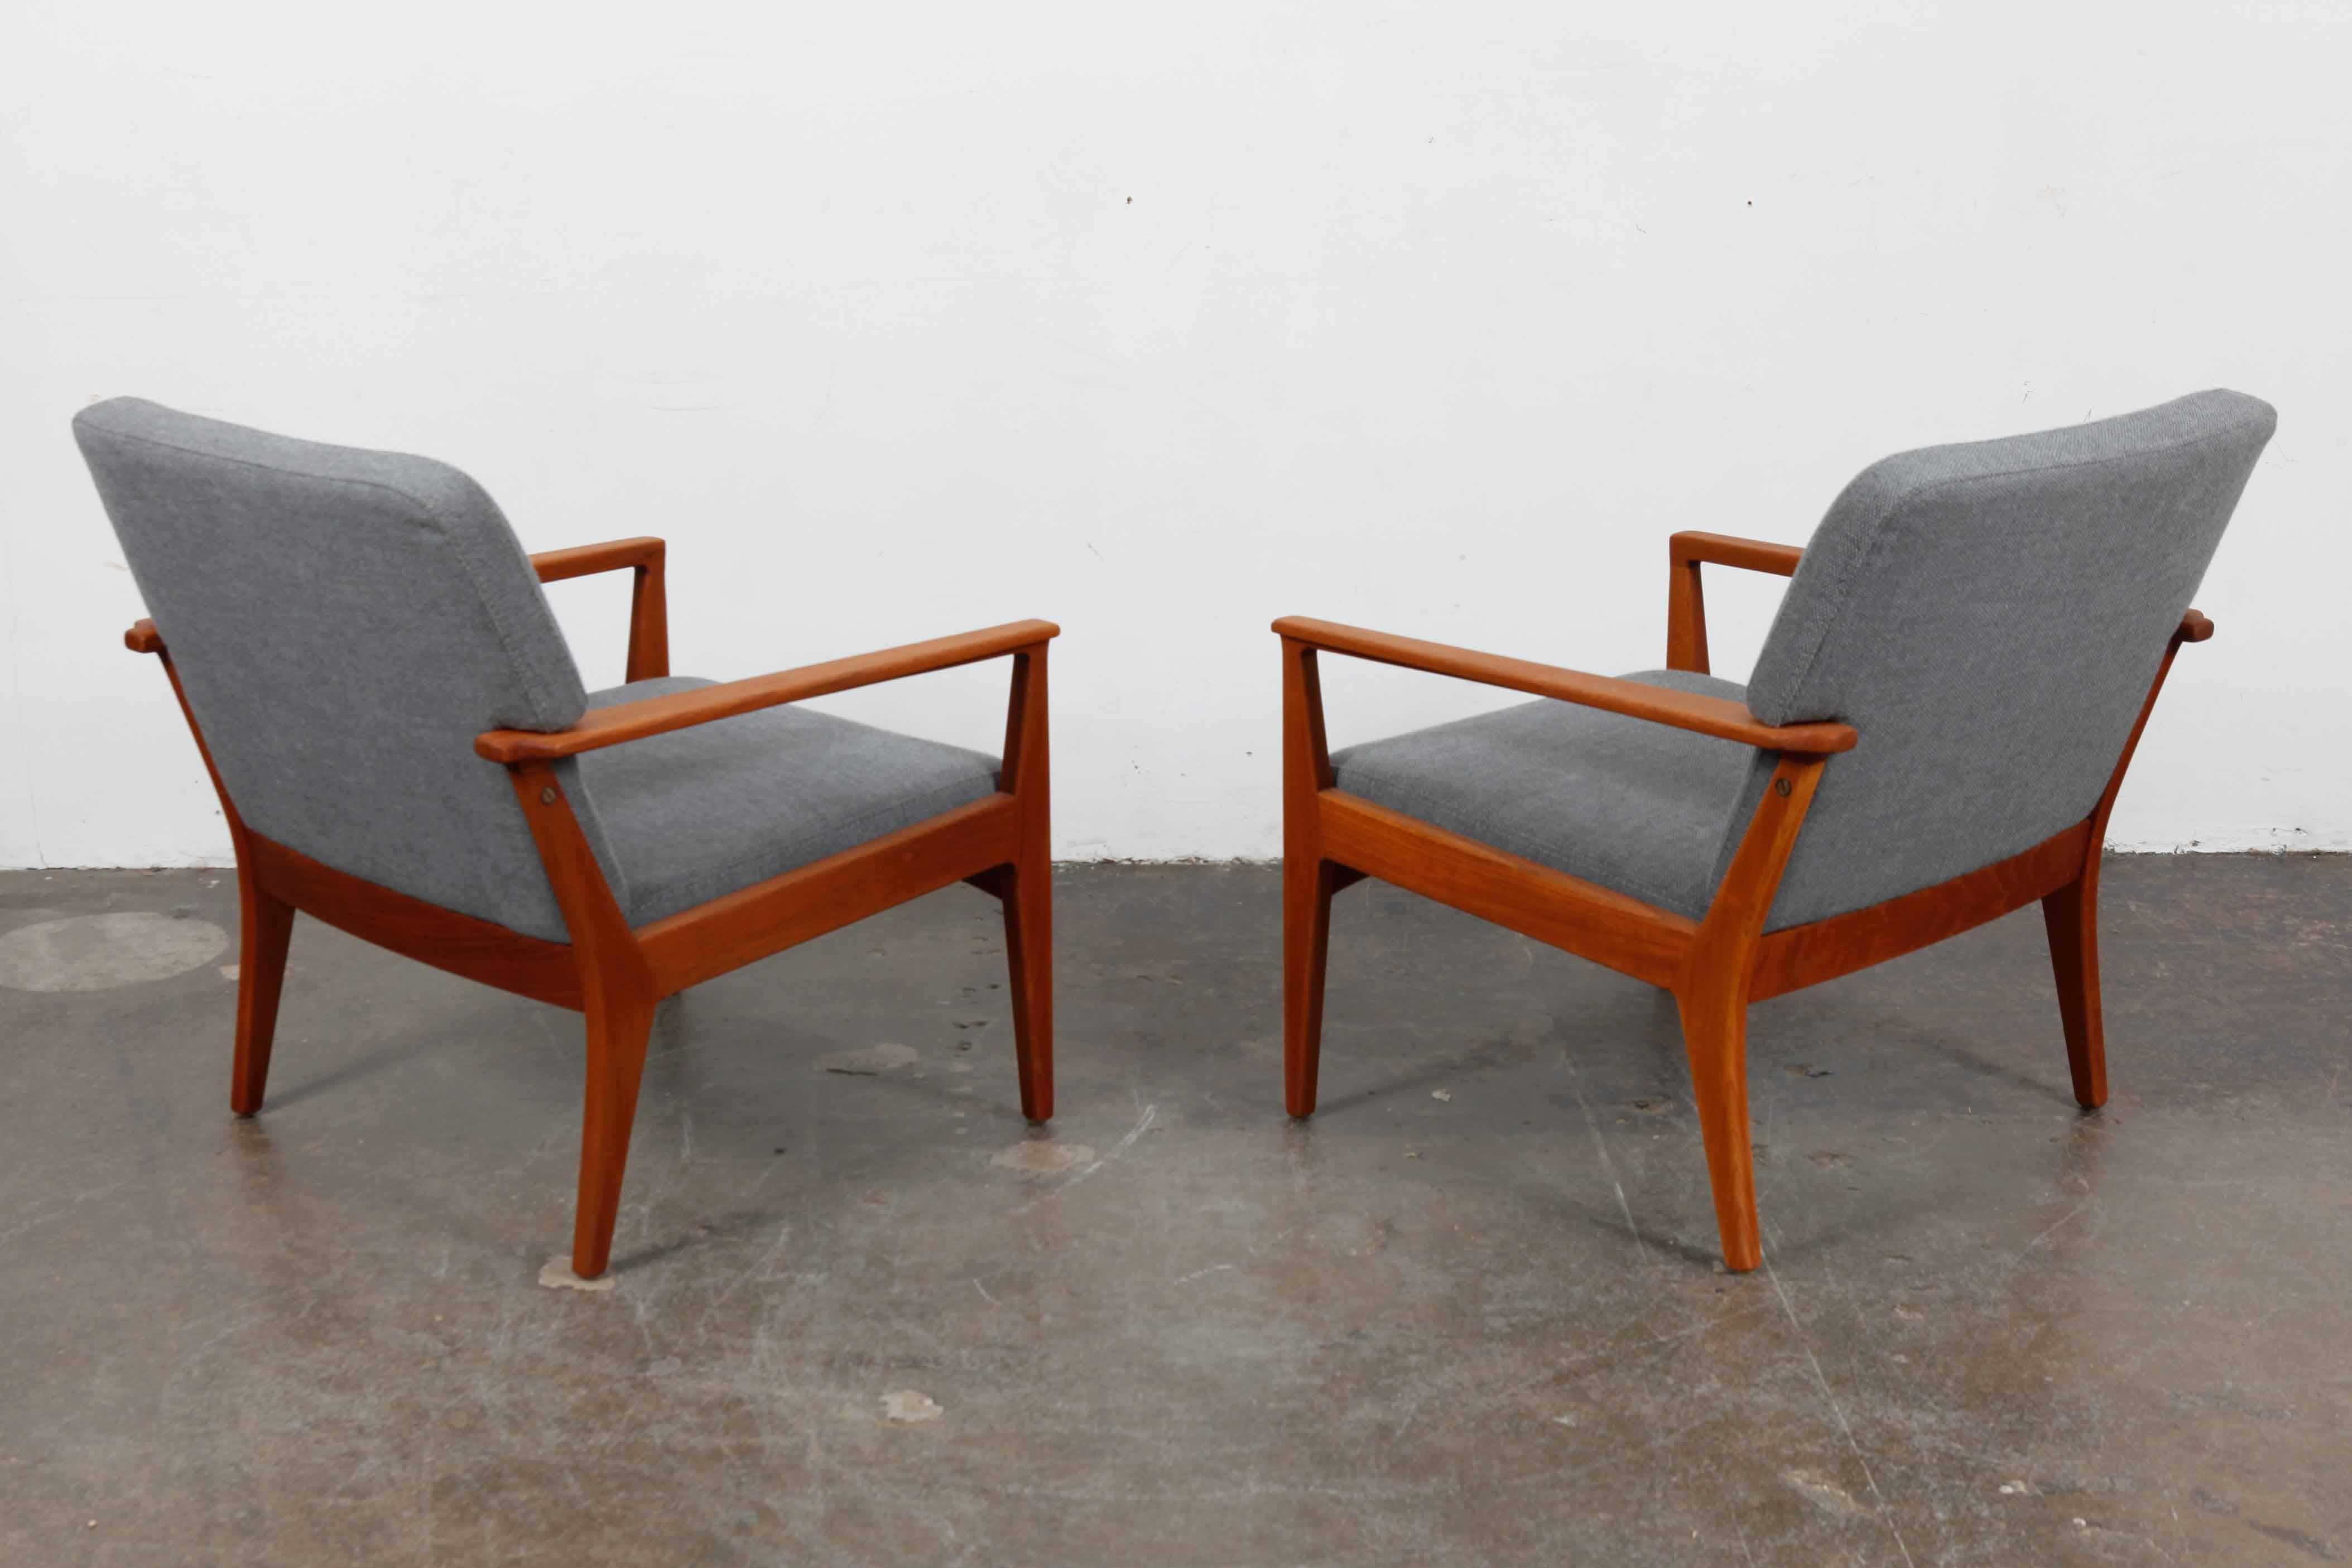 Mid-20th Century Pair of Swedish Teak 1960s Lounge Chairs Newly Refinished and Reupholstered